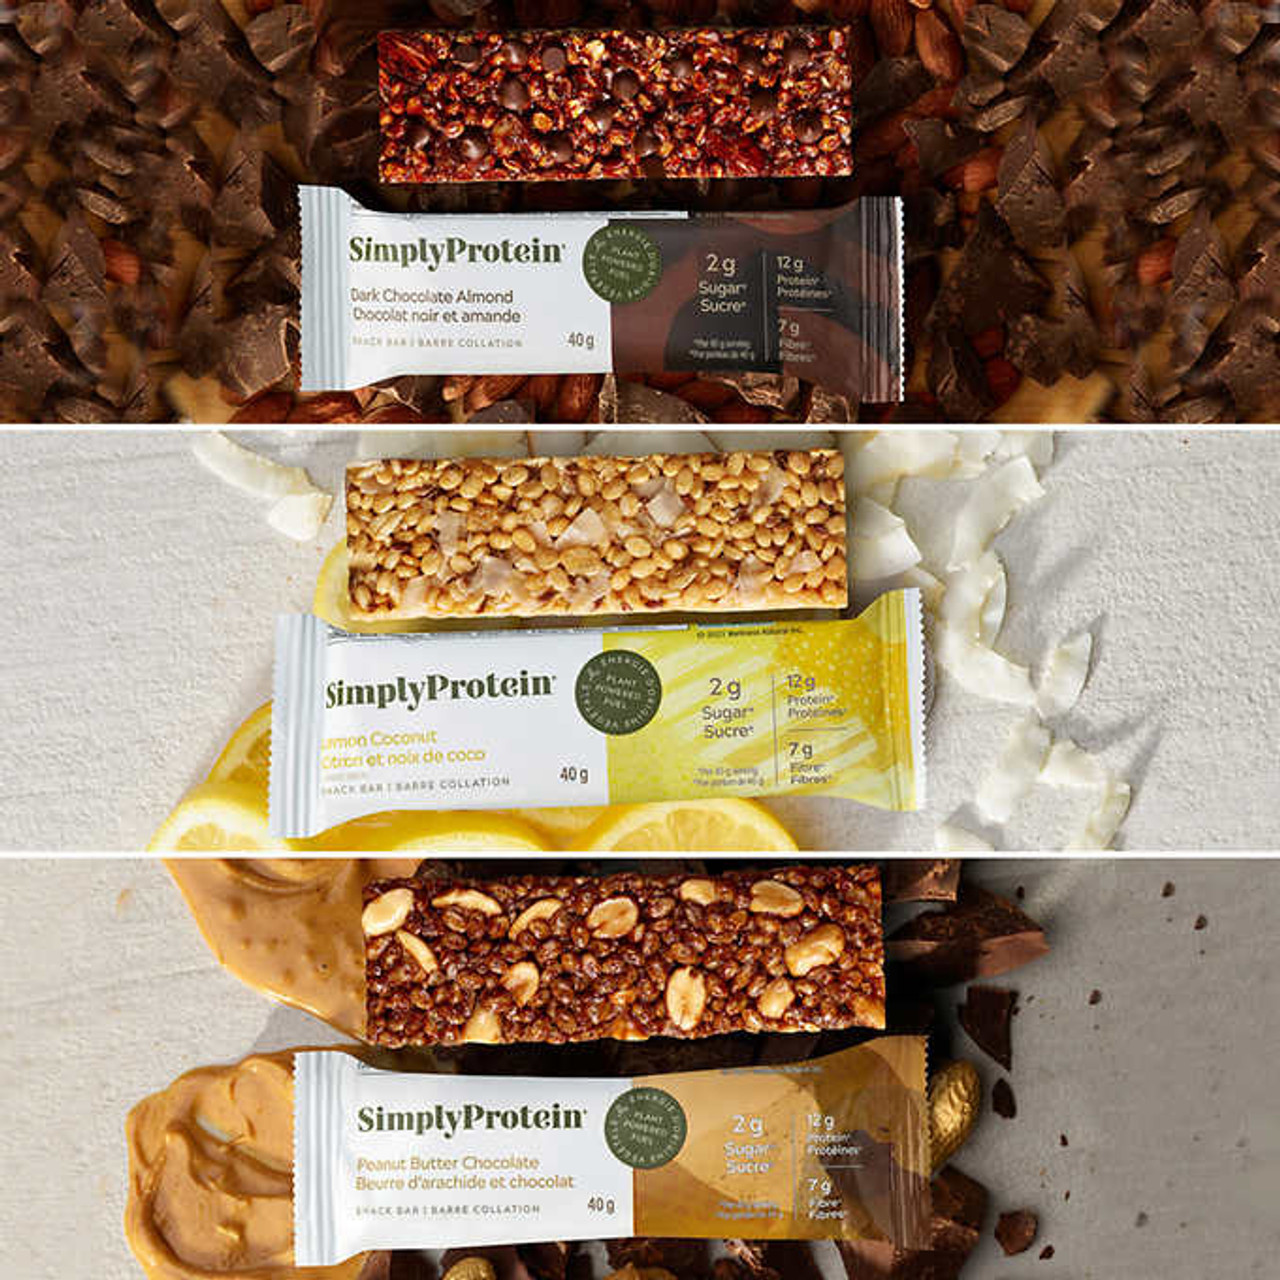 SimplyProtein - Plant Based Protein Bars Variety Pack, 15 × 40 g